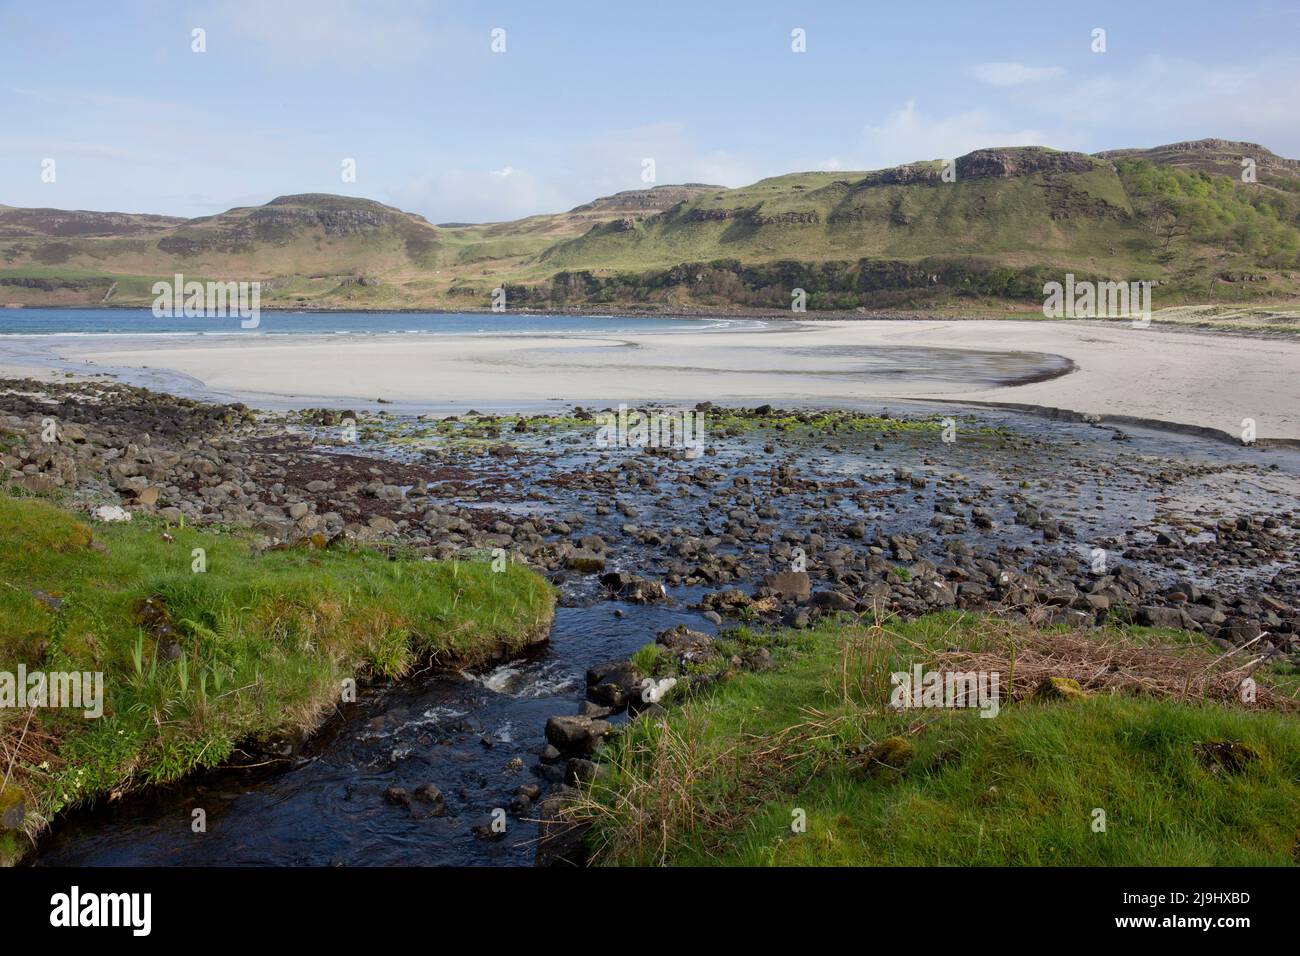 Calgary Bay, Isle of Mull, Scotland Banque D'Images